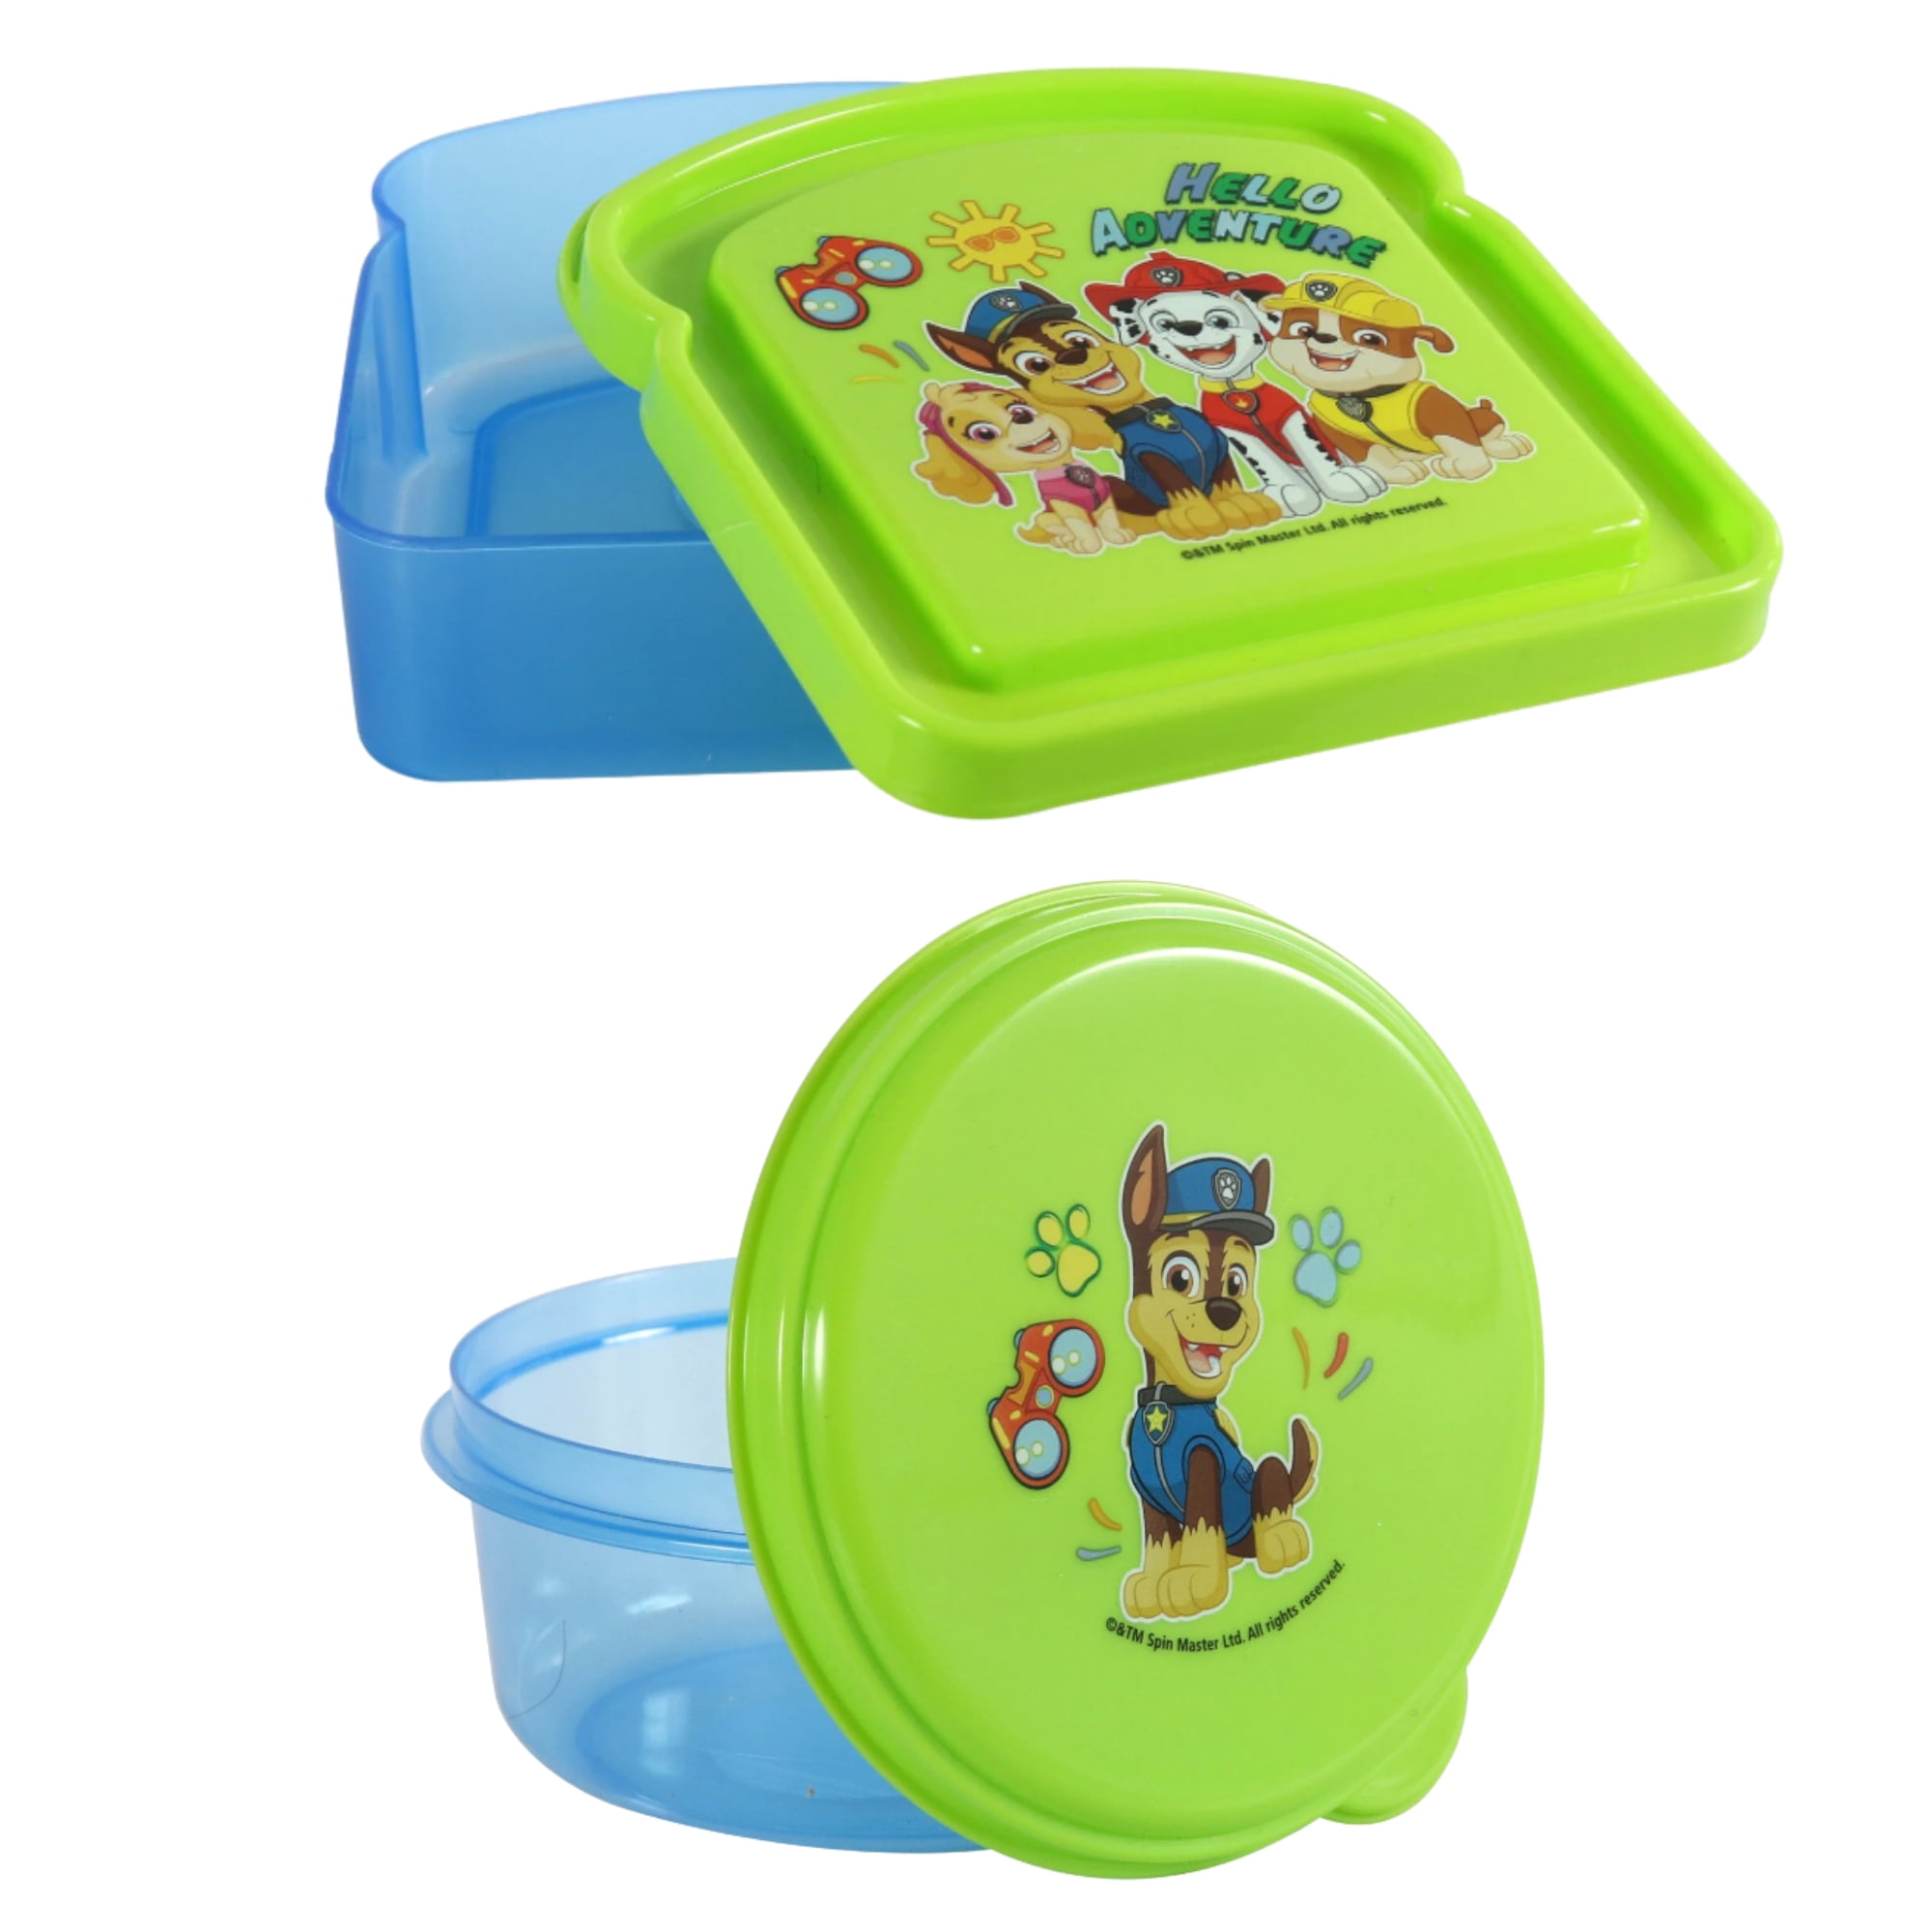 Bulk Nickelodeon Paw Patrol Plastic Sandwich Containers with Lids at  DollarTree.com